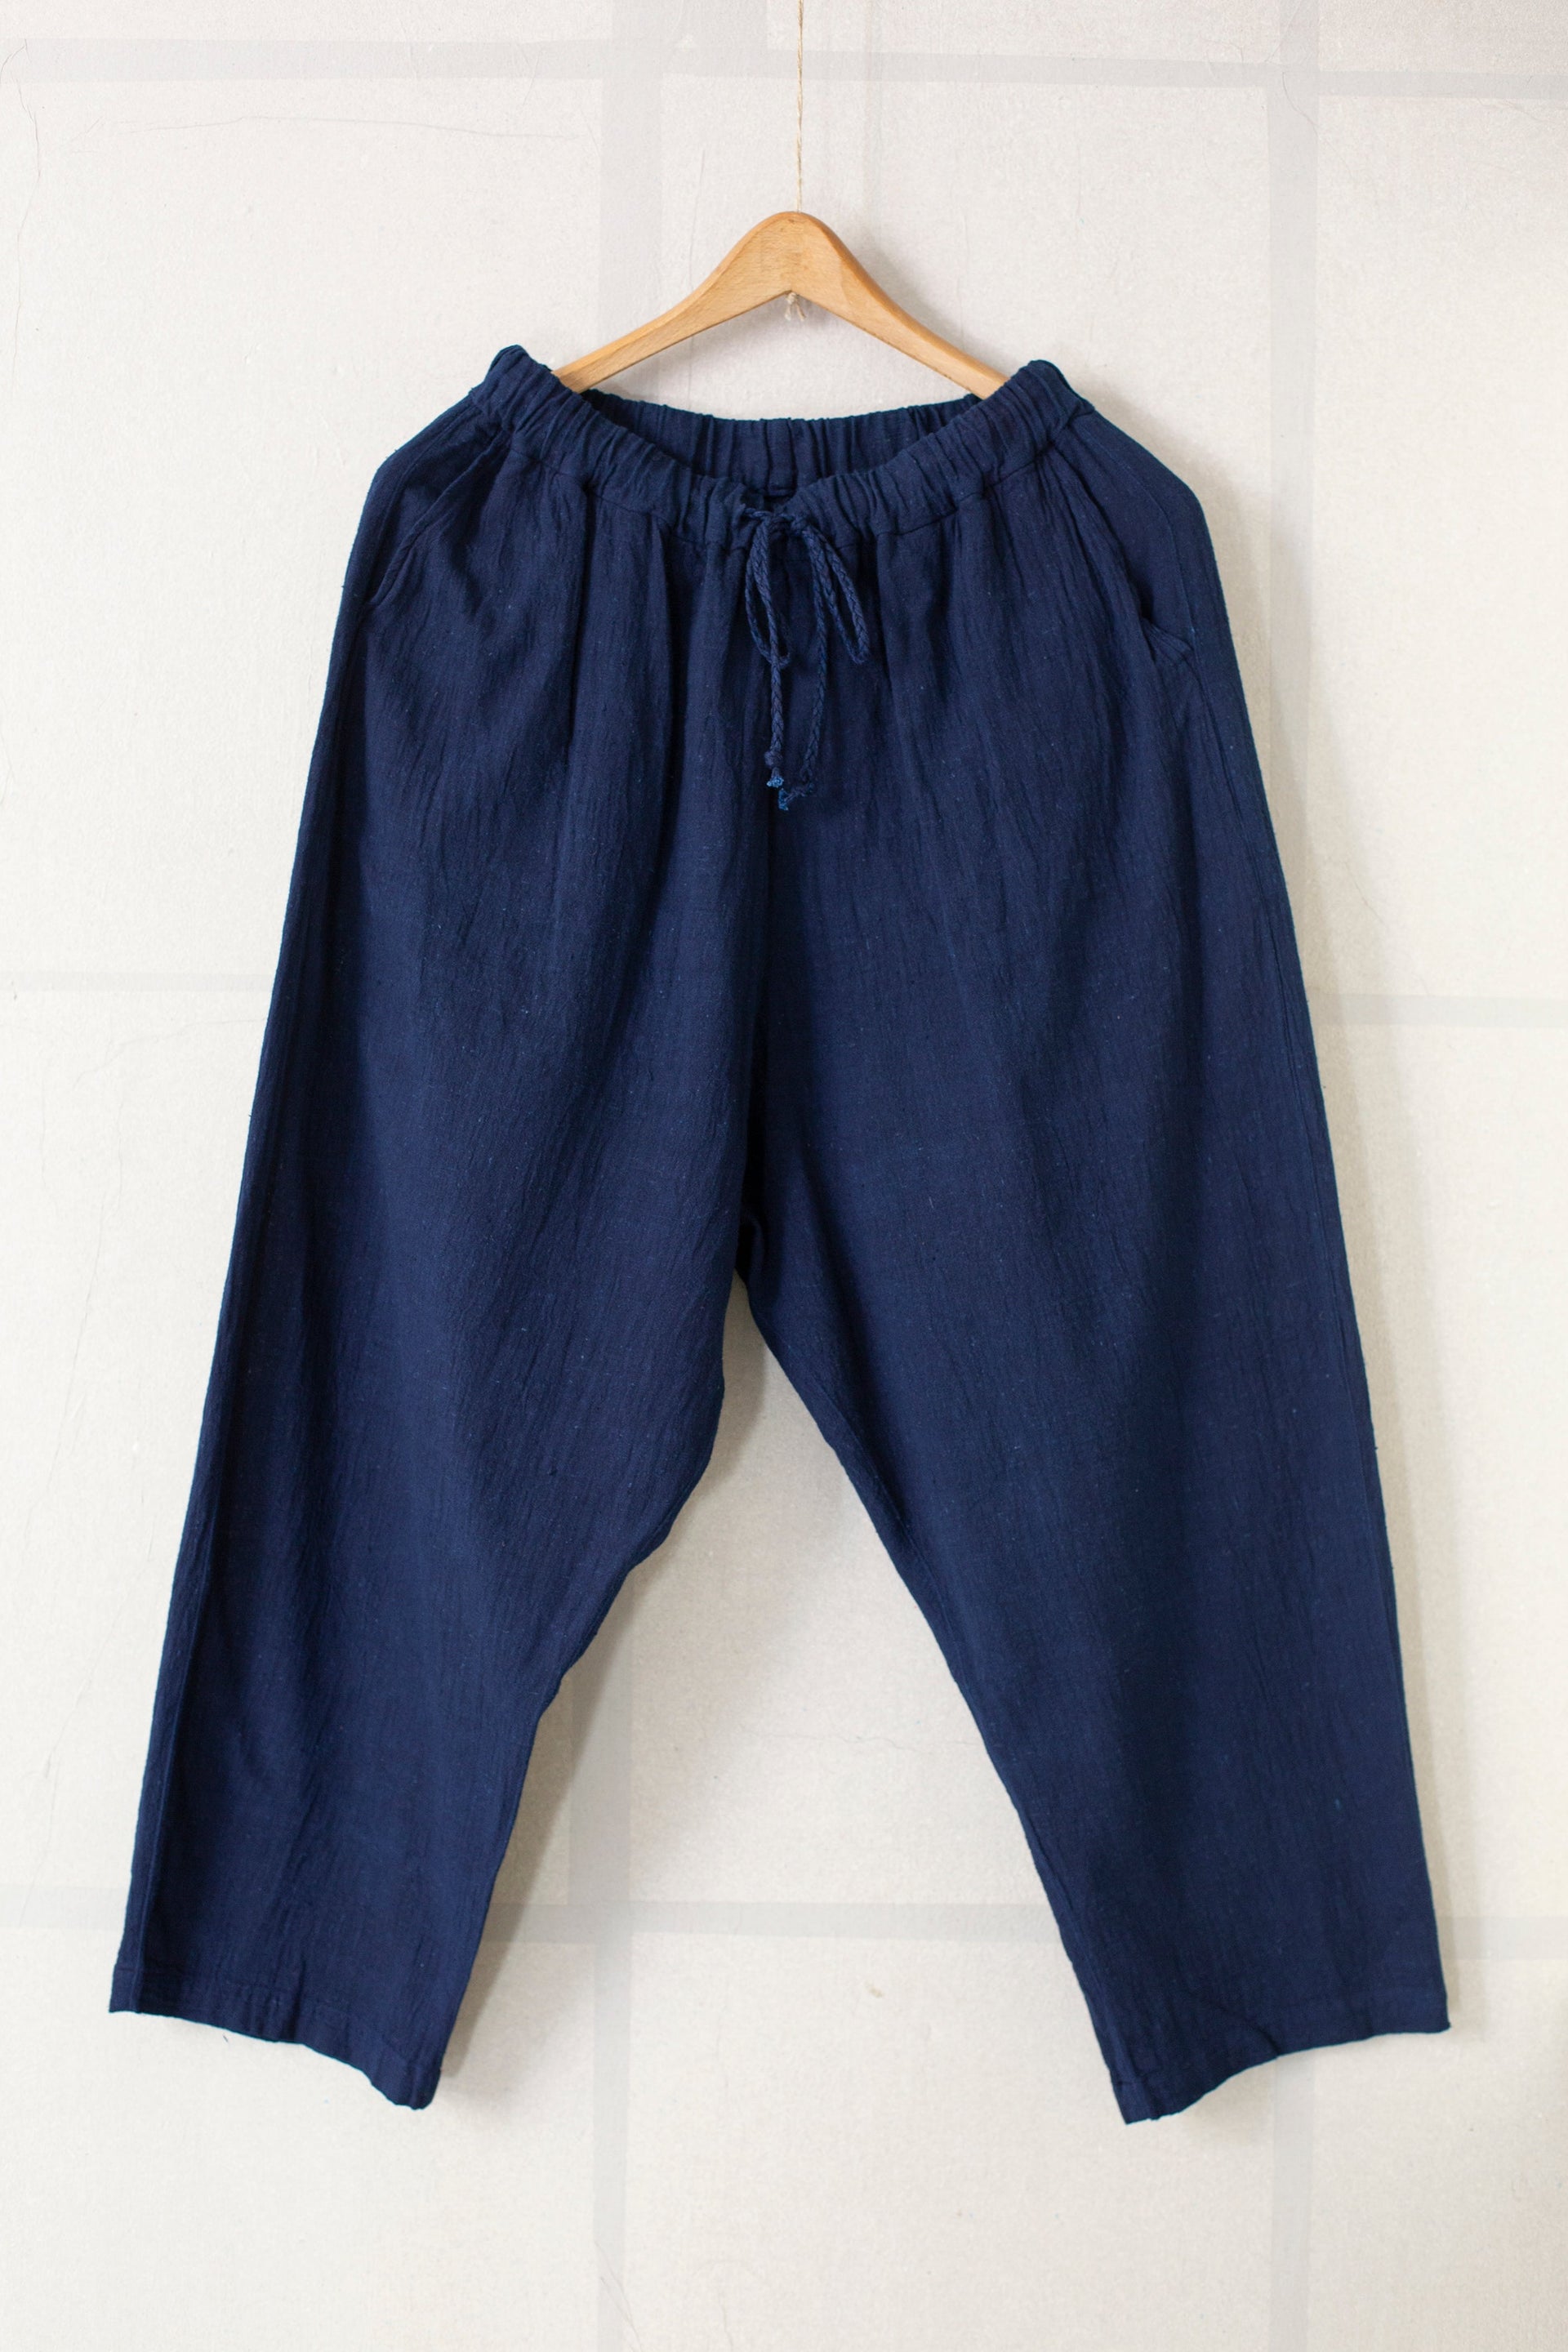 Traditional Handwoven Light Cotton Guatemalan Baggy Summer Trousers - Etsy